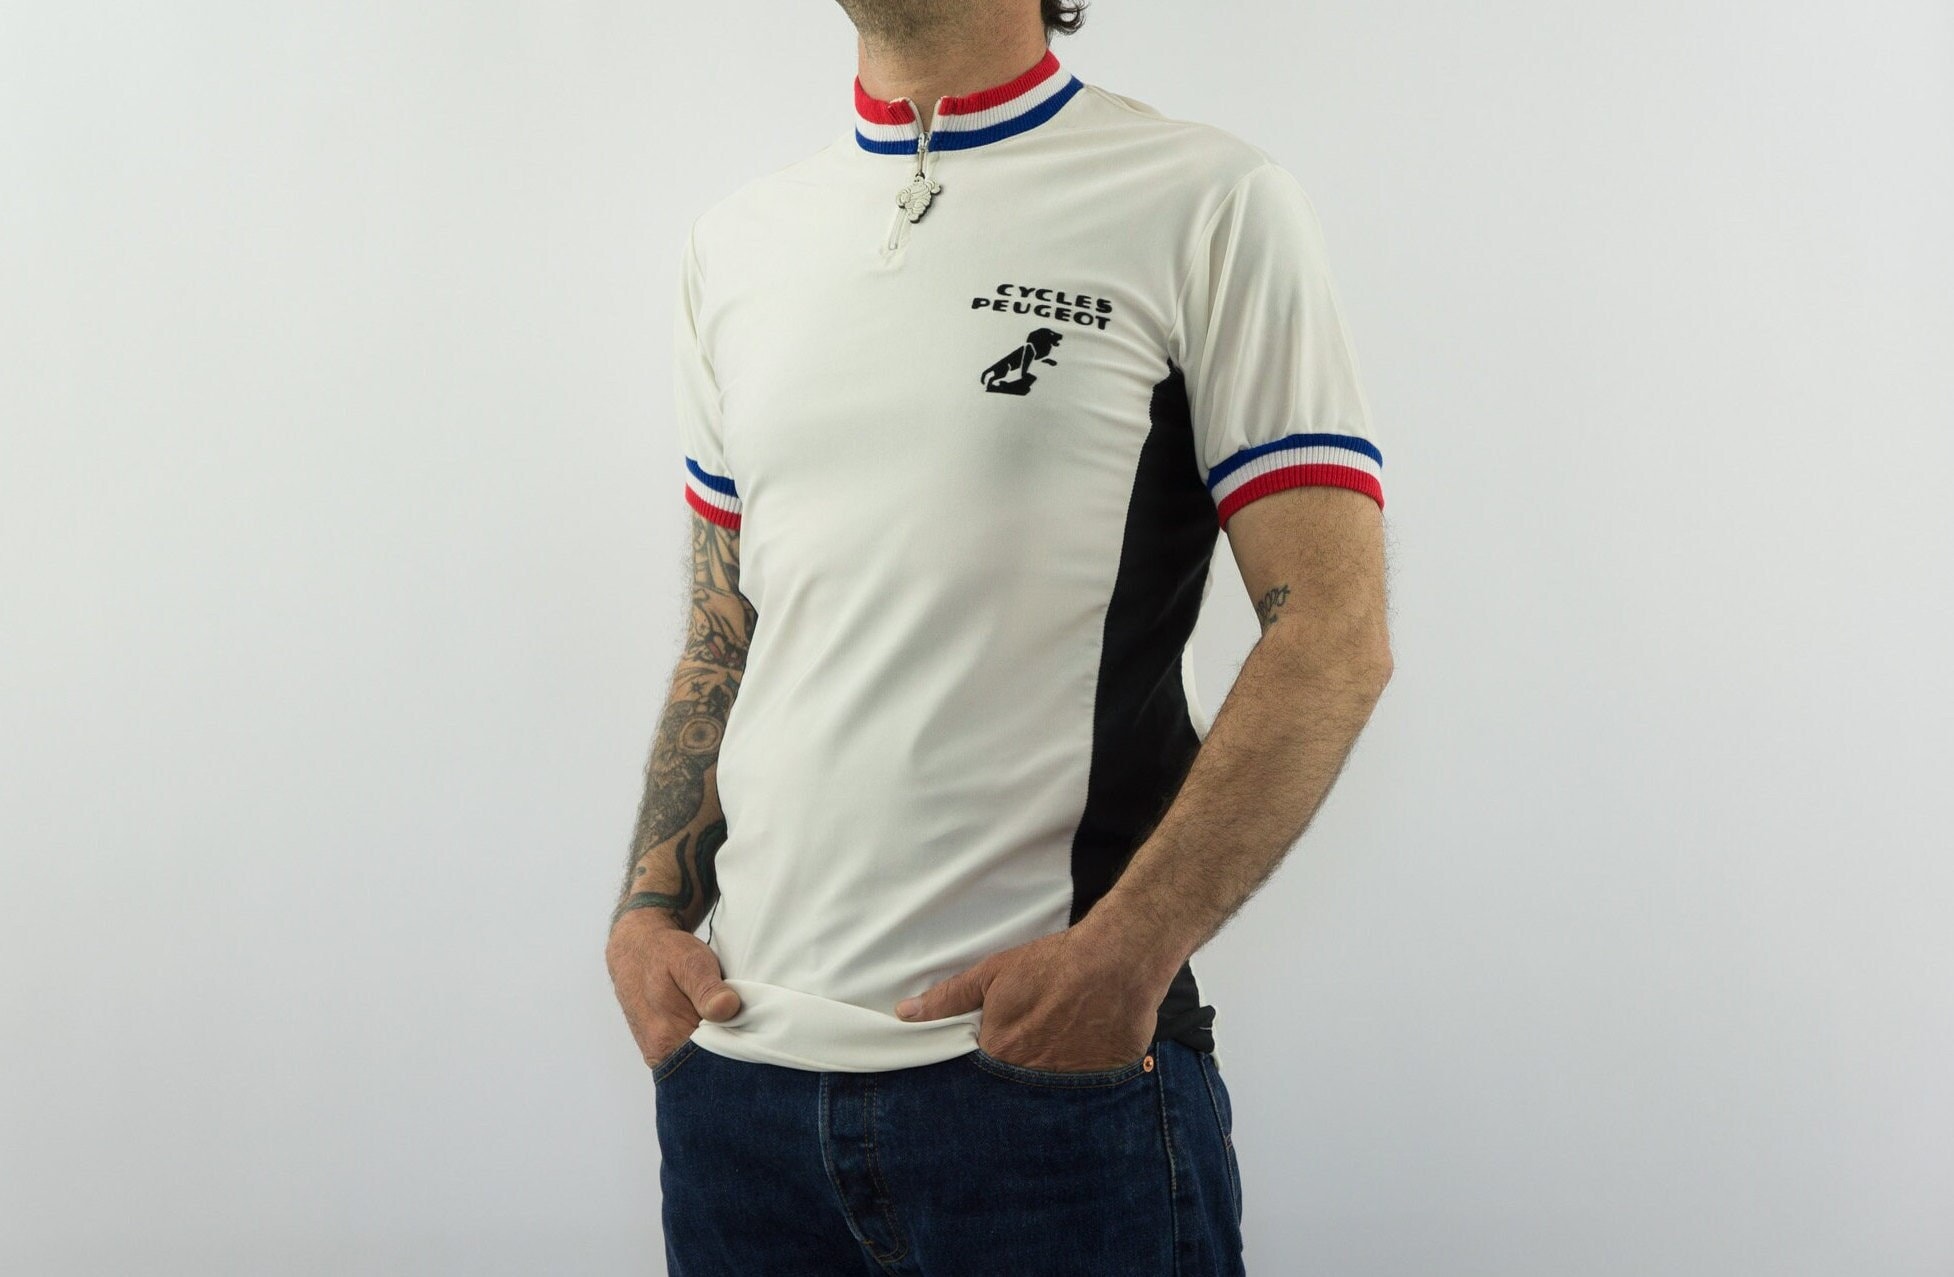 Peugeot | Vintage Cycling Jersey | 1980s | Cycles | Retro Cycle Jersey | Short Sleeves T-Shirt | Made in France | Size S/M